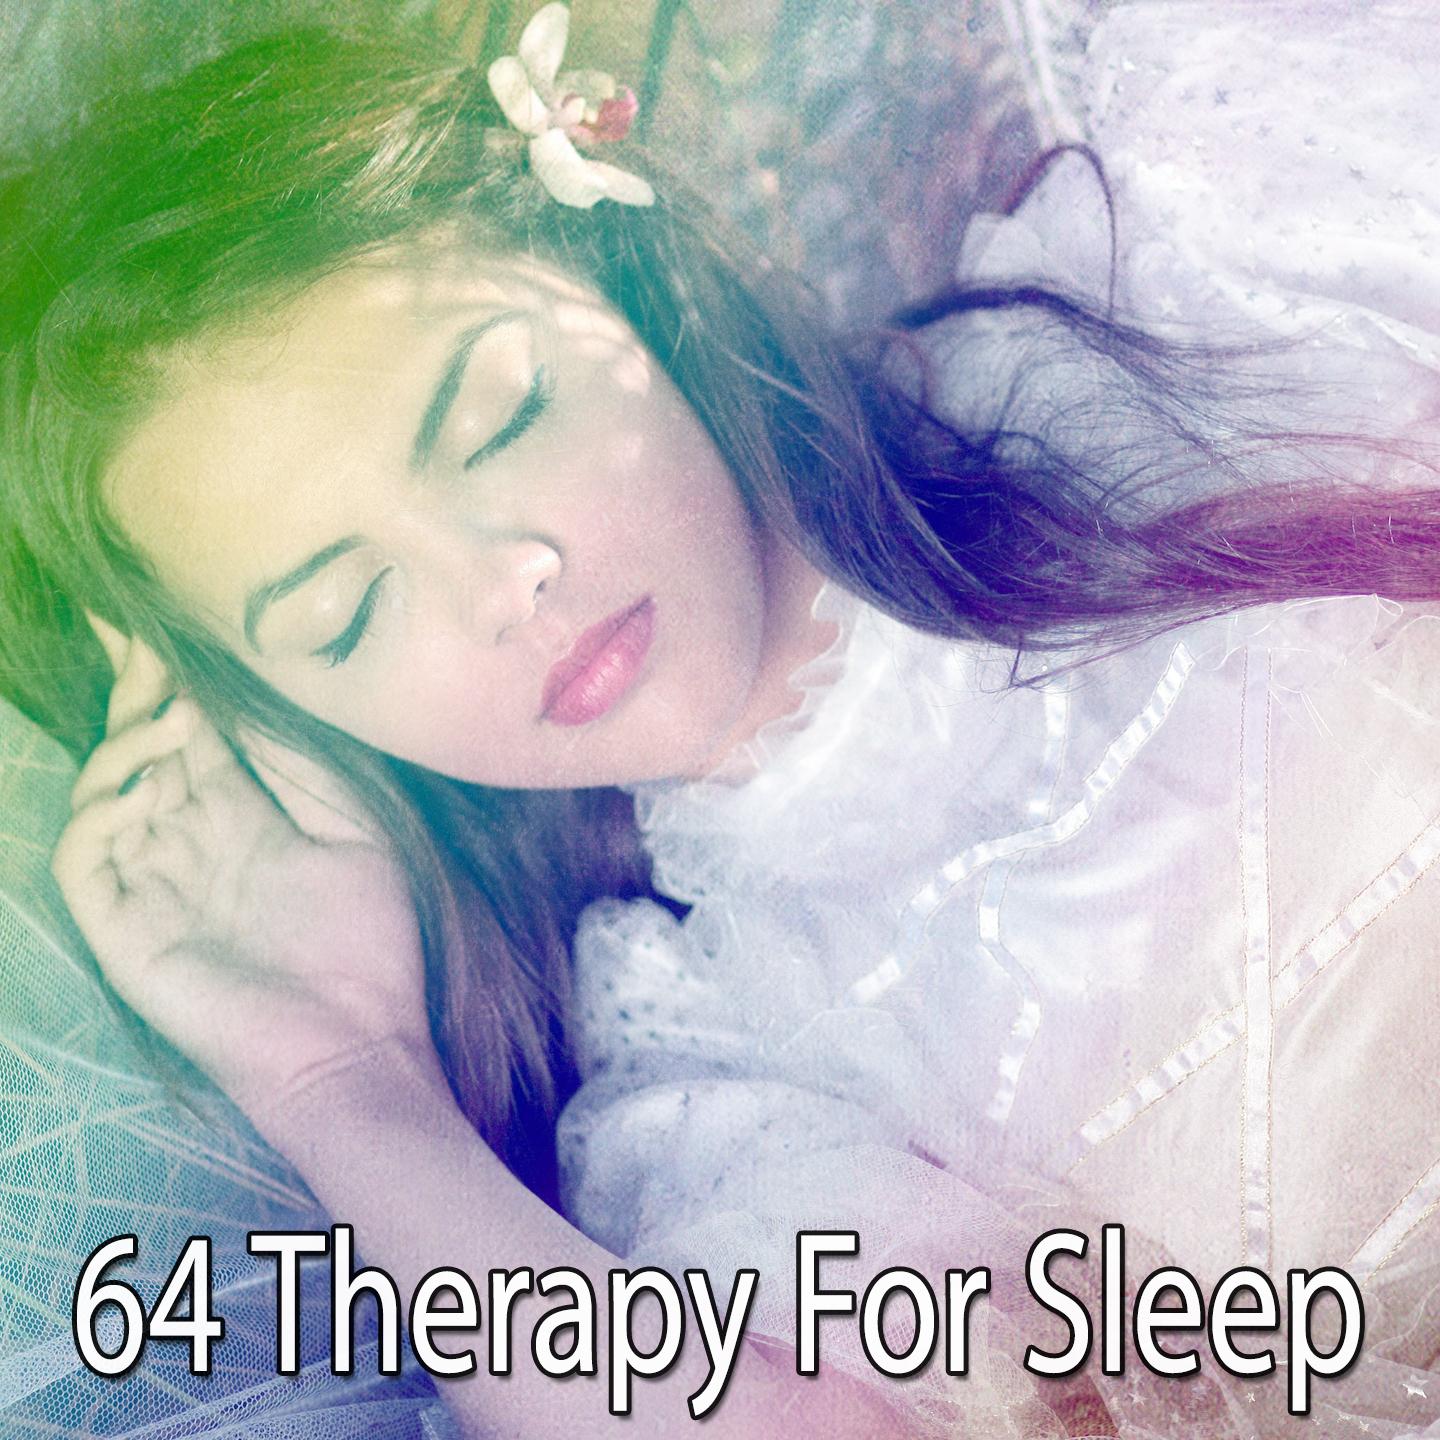 64 Therapy for Sleep